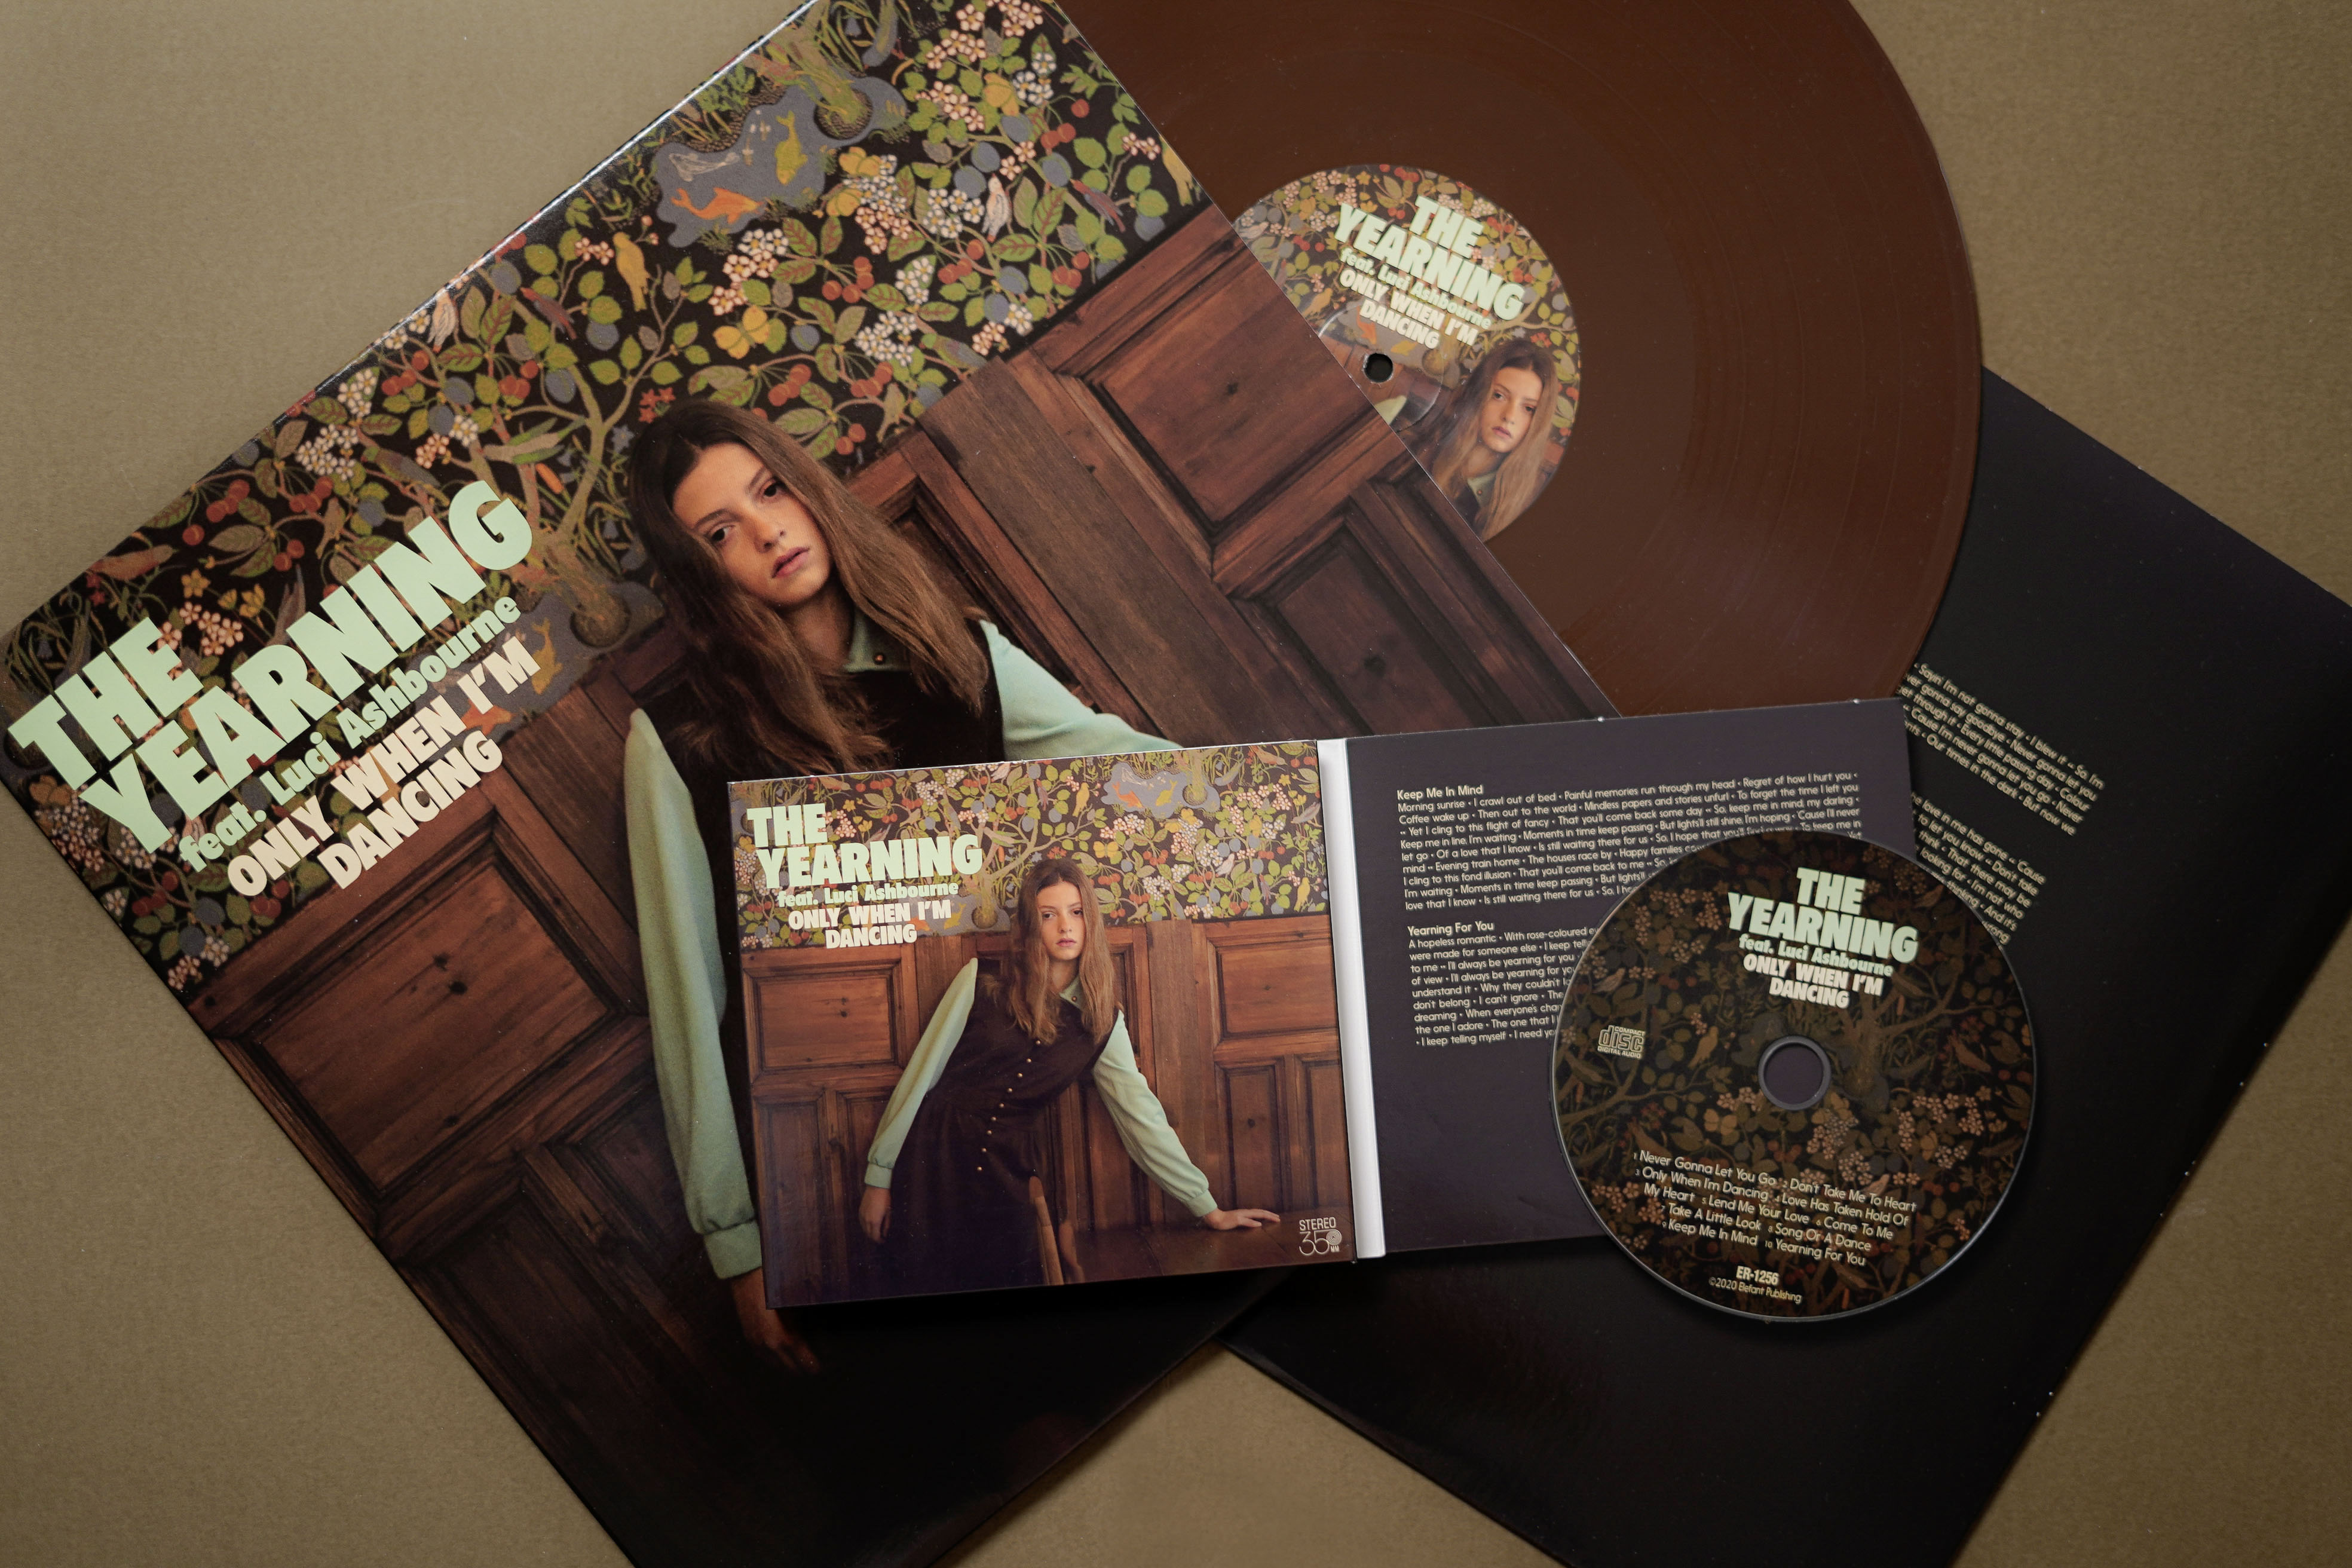 The Yearning "Only When I'm Dancing" LP and CD